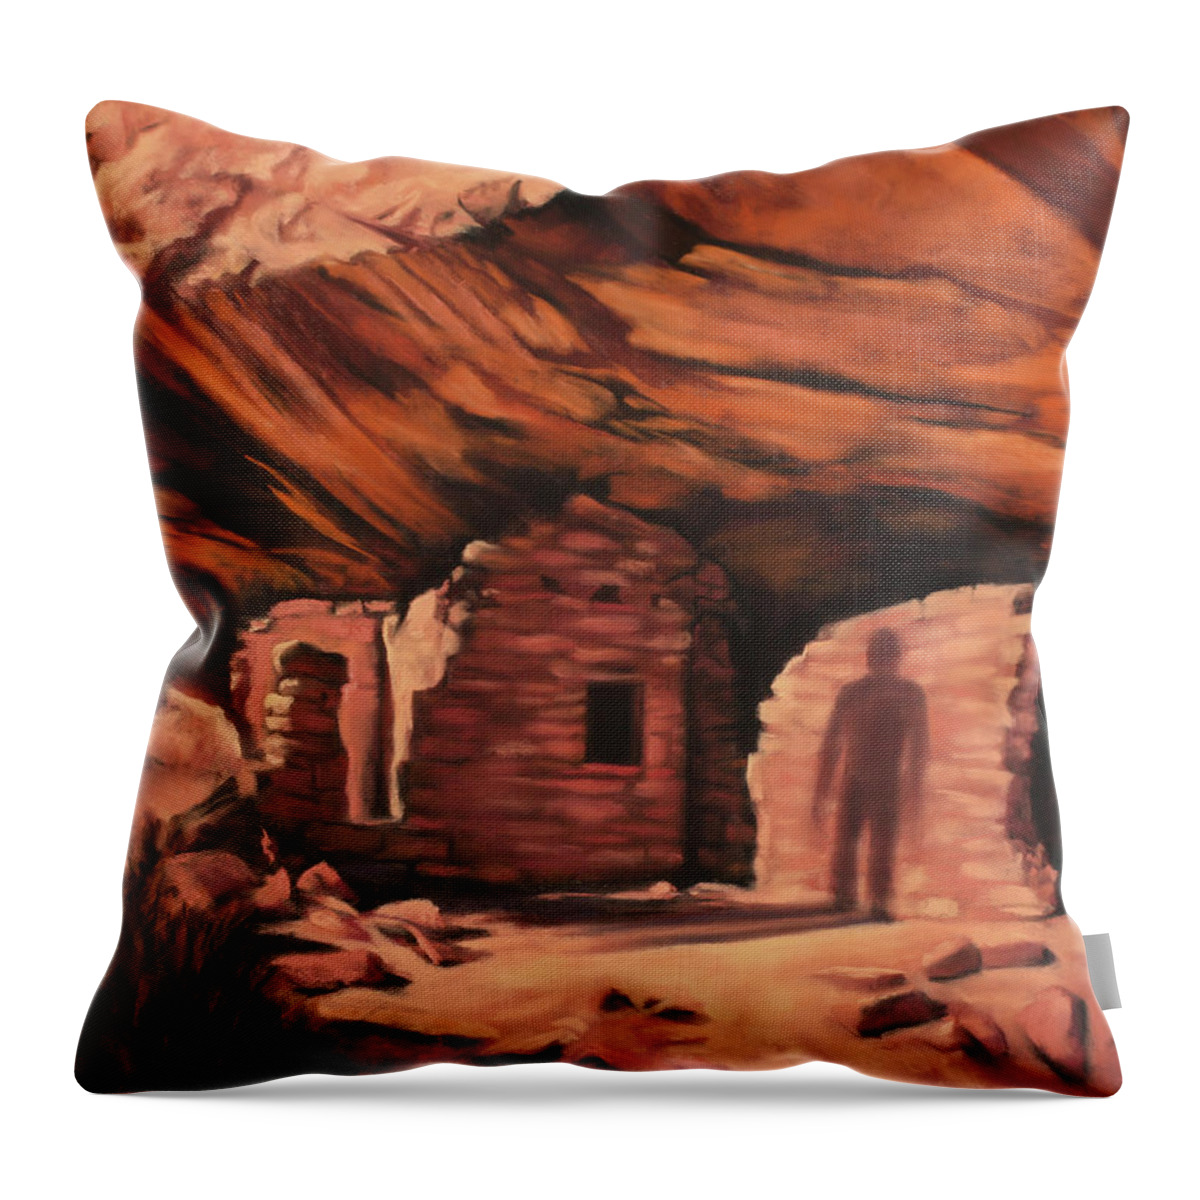 Landscape Throw Pillow featuring the painting Shadow Spirit by Sandi Snead